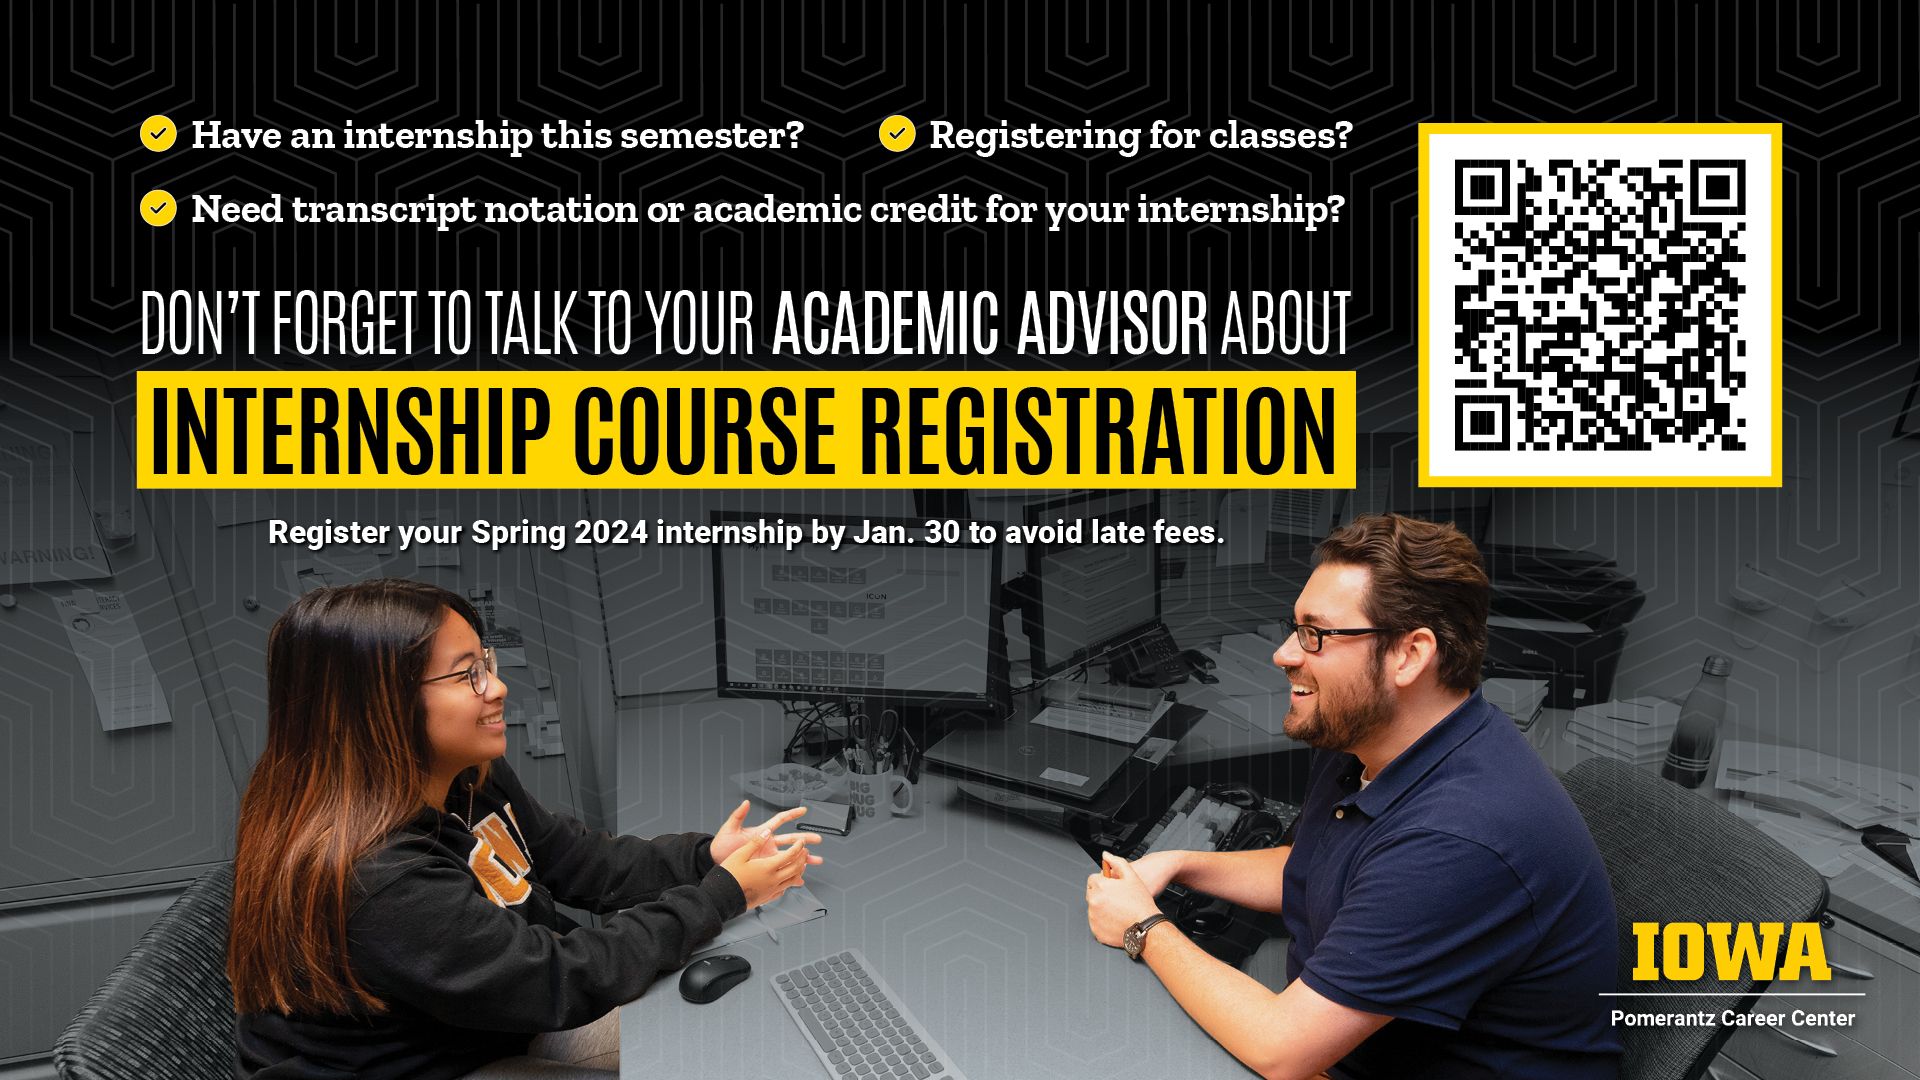 Register your Spring 2024 internship by January 30.